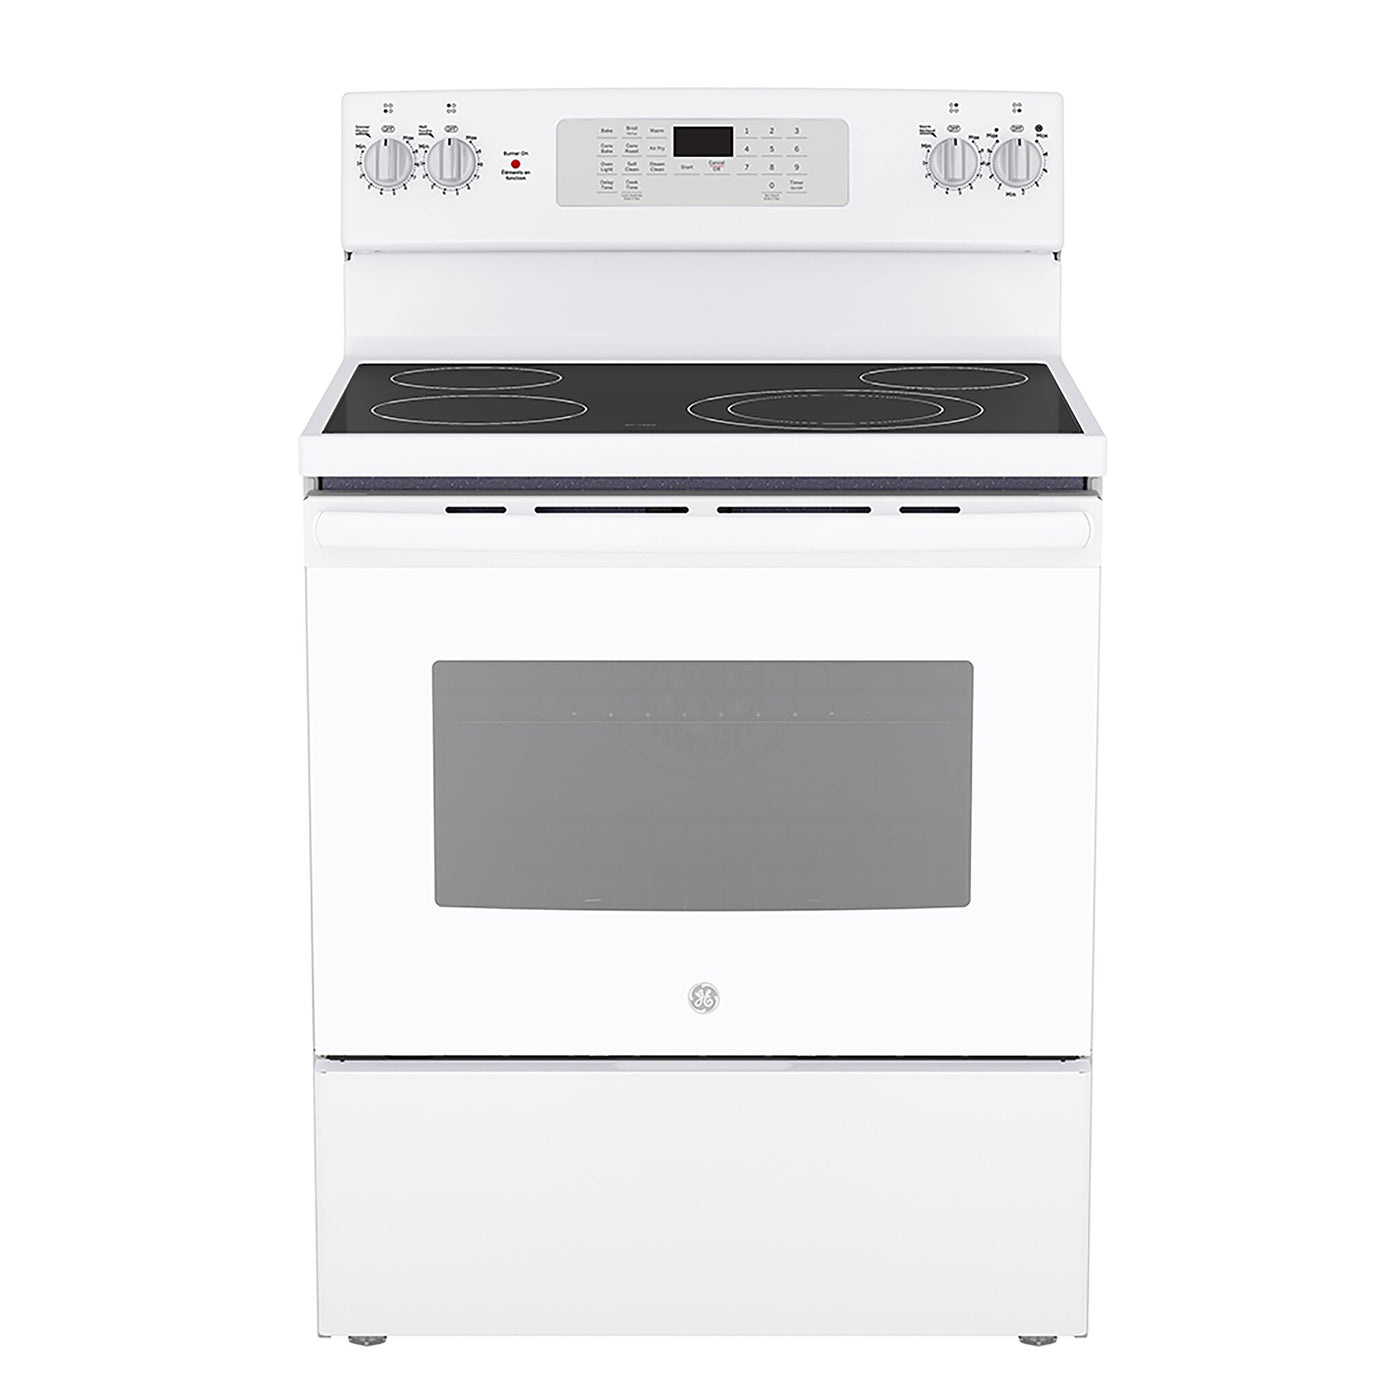 GE White Freestanding Electric Convection Range with No-Preheat Air Fry (5.0 Cu. Ft.) - JCB830DVWW